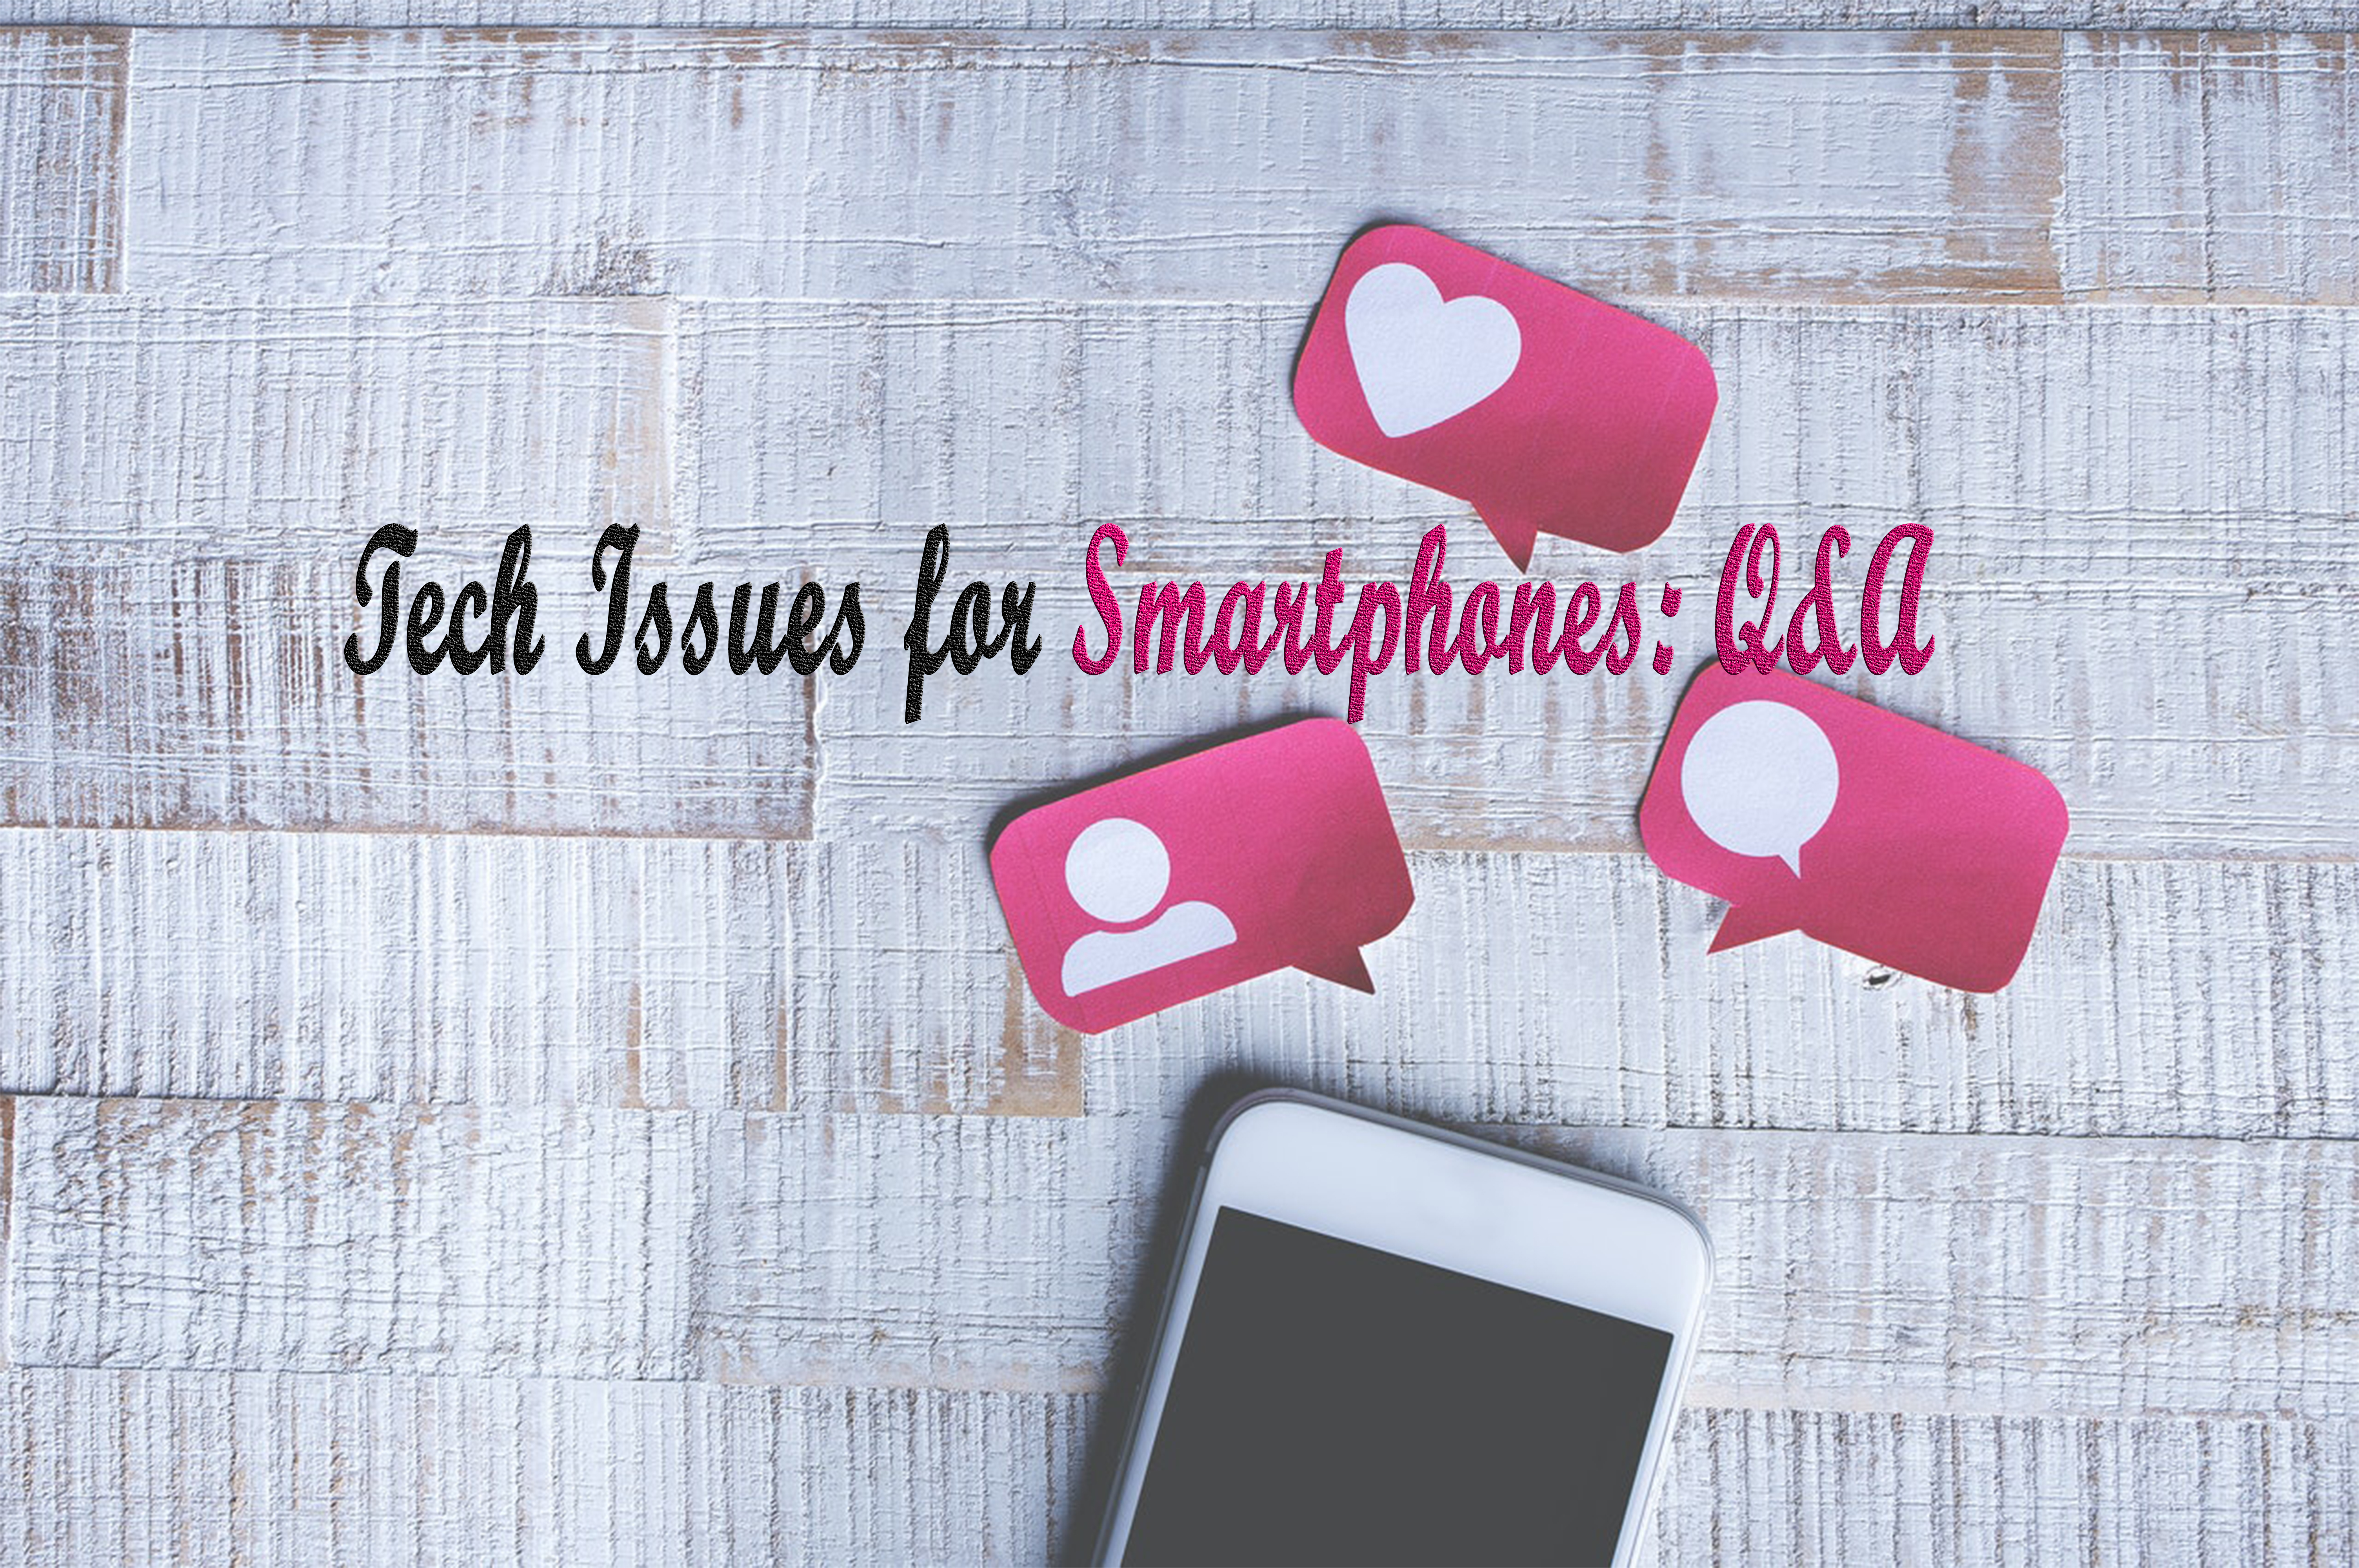 Tech Issues for Smartphones: Q&A 